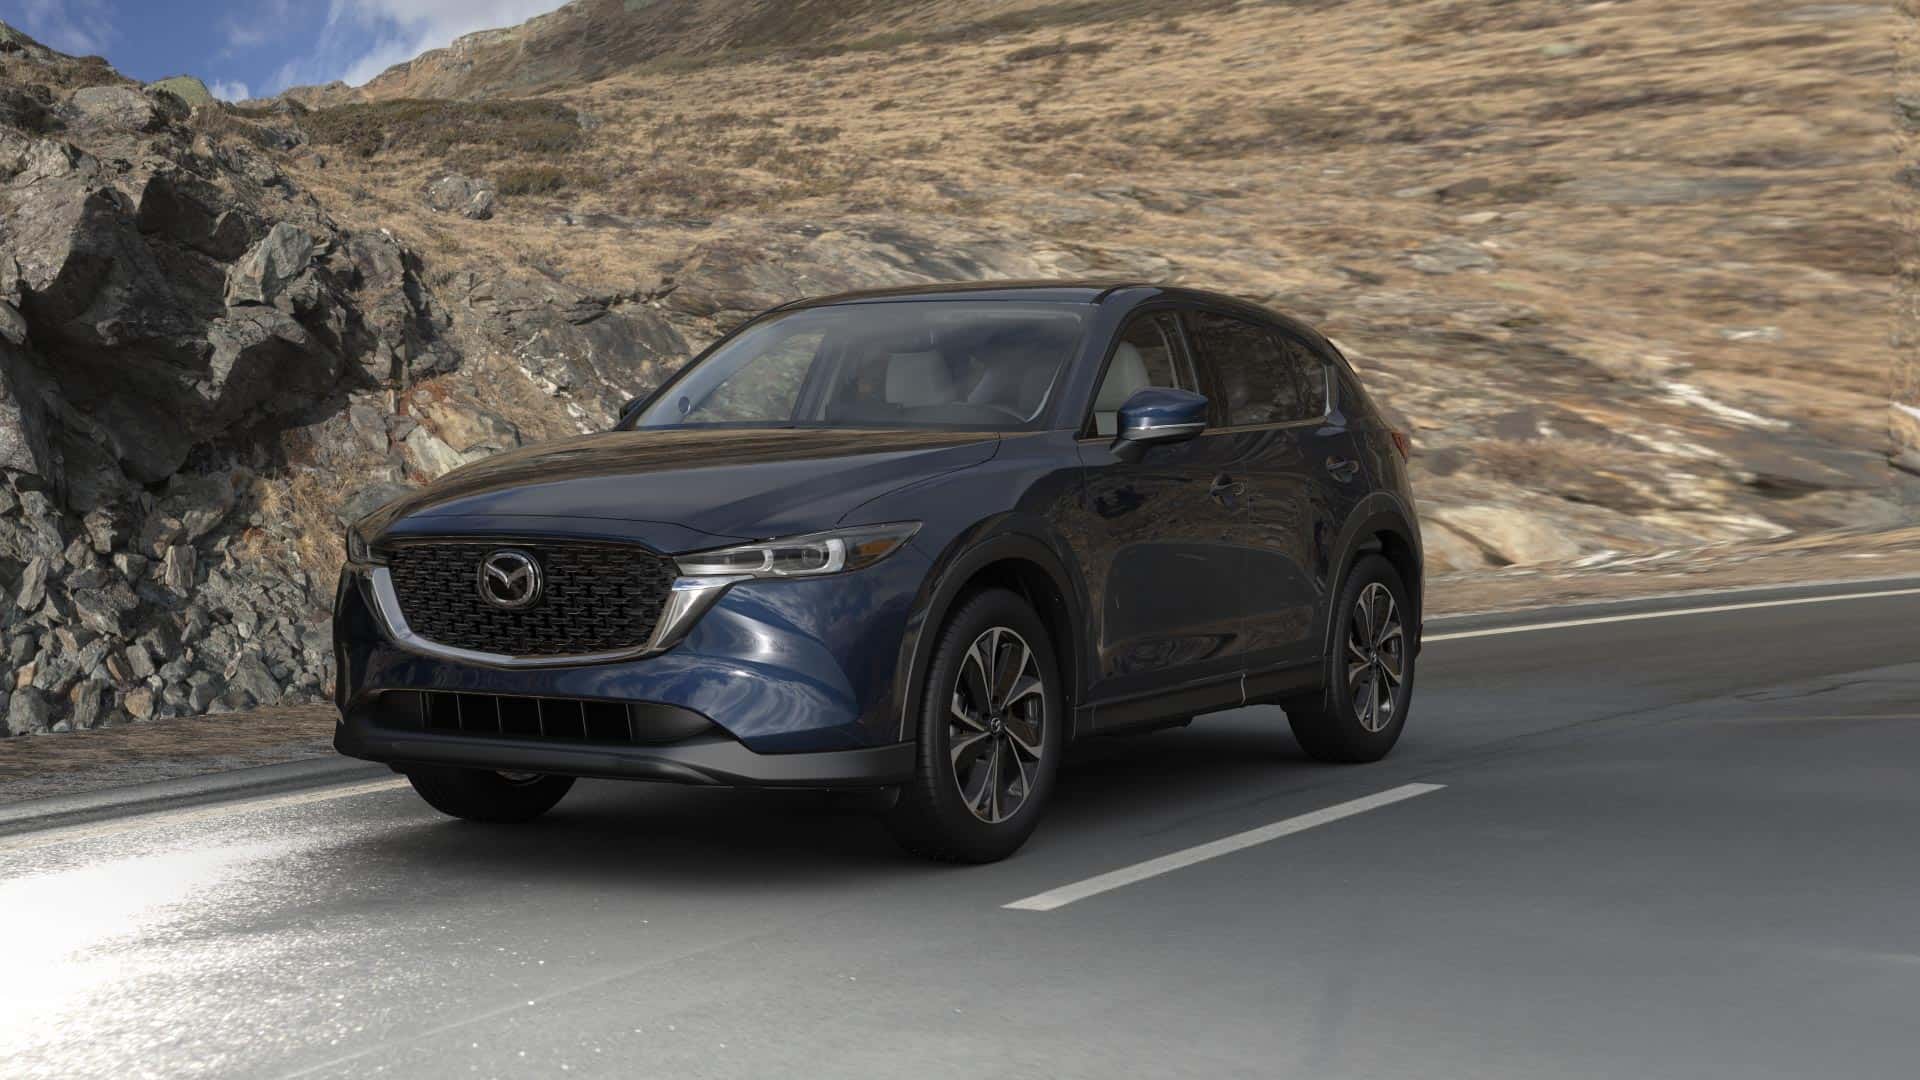 2023 Mazda CX-5 2.5 S Premium Plus Deep Crystal Blue Mica | Russell & Smith Mazda in Houston TX